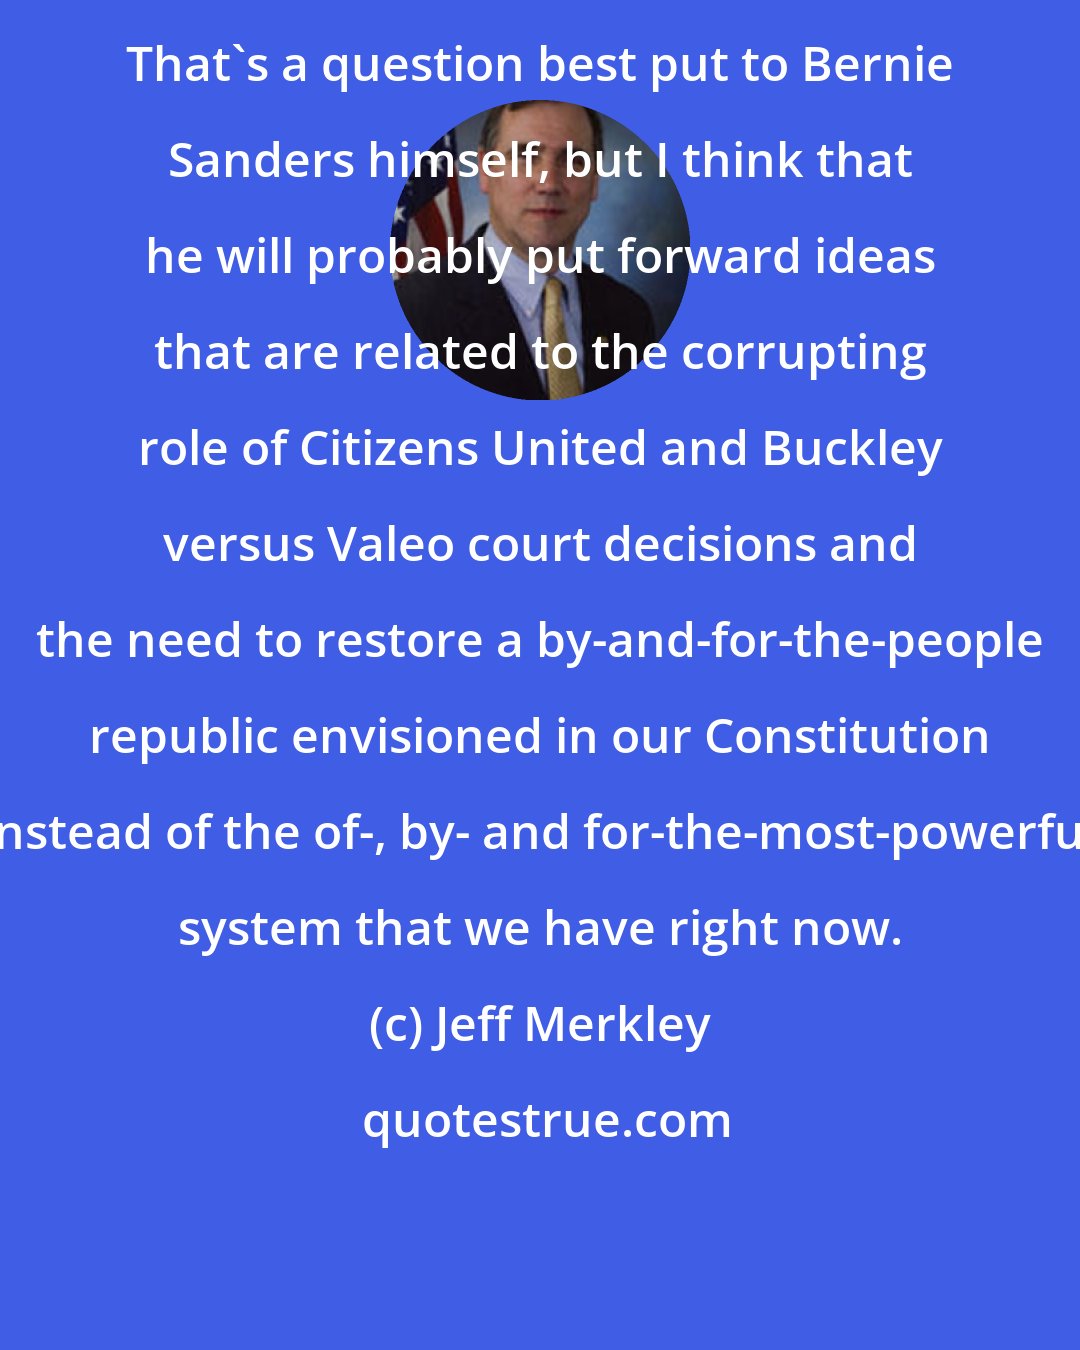 Jeff Merkley: That's a question best put to Bernie Sanders himself, but I think that he will probably put forward ideas that are related to the corrupting role of Citizens United and Buckley versus Valeo court decisions and the need to restore a by-and-for-the-people republic envisioned in our Constitution instead of the of-, by- and for-the-most-powerful system that we have right now.